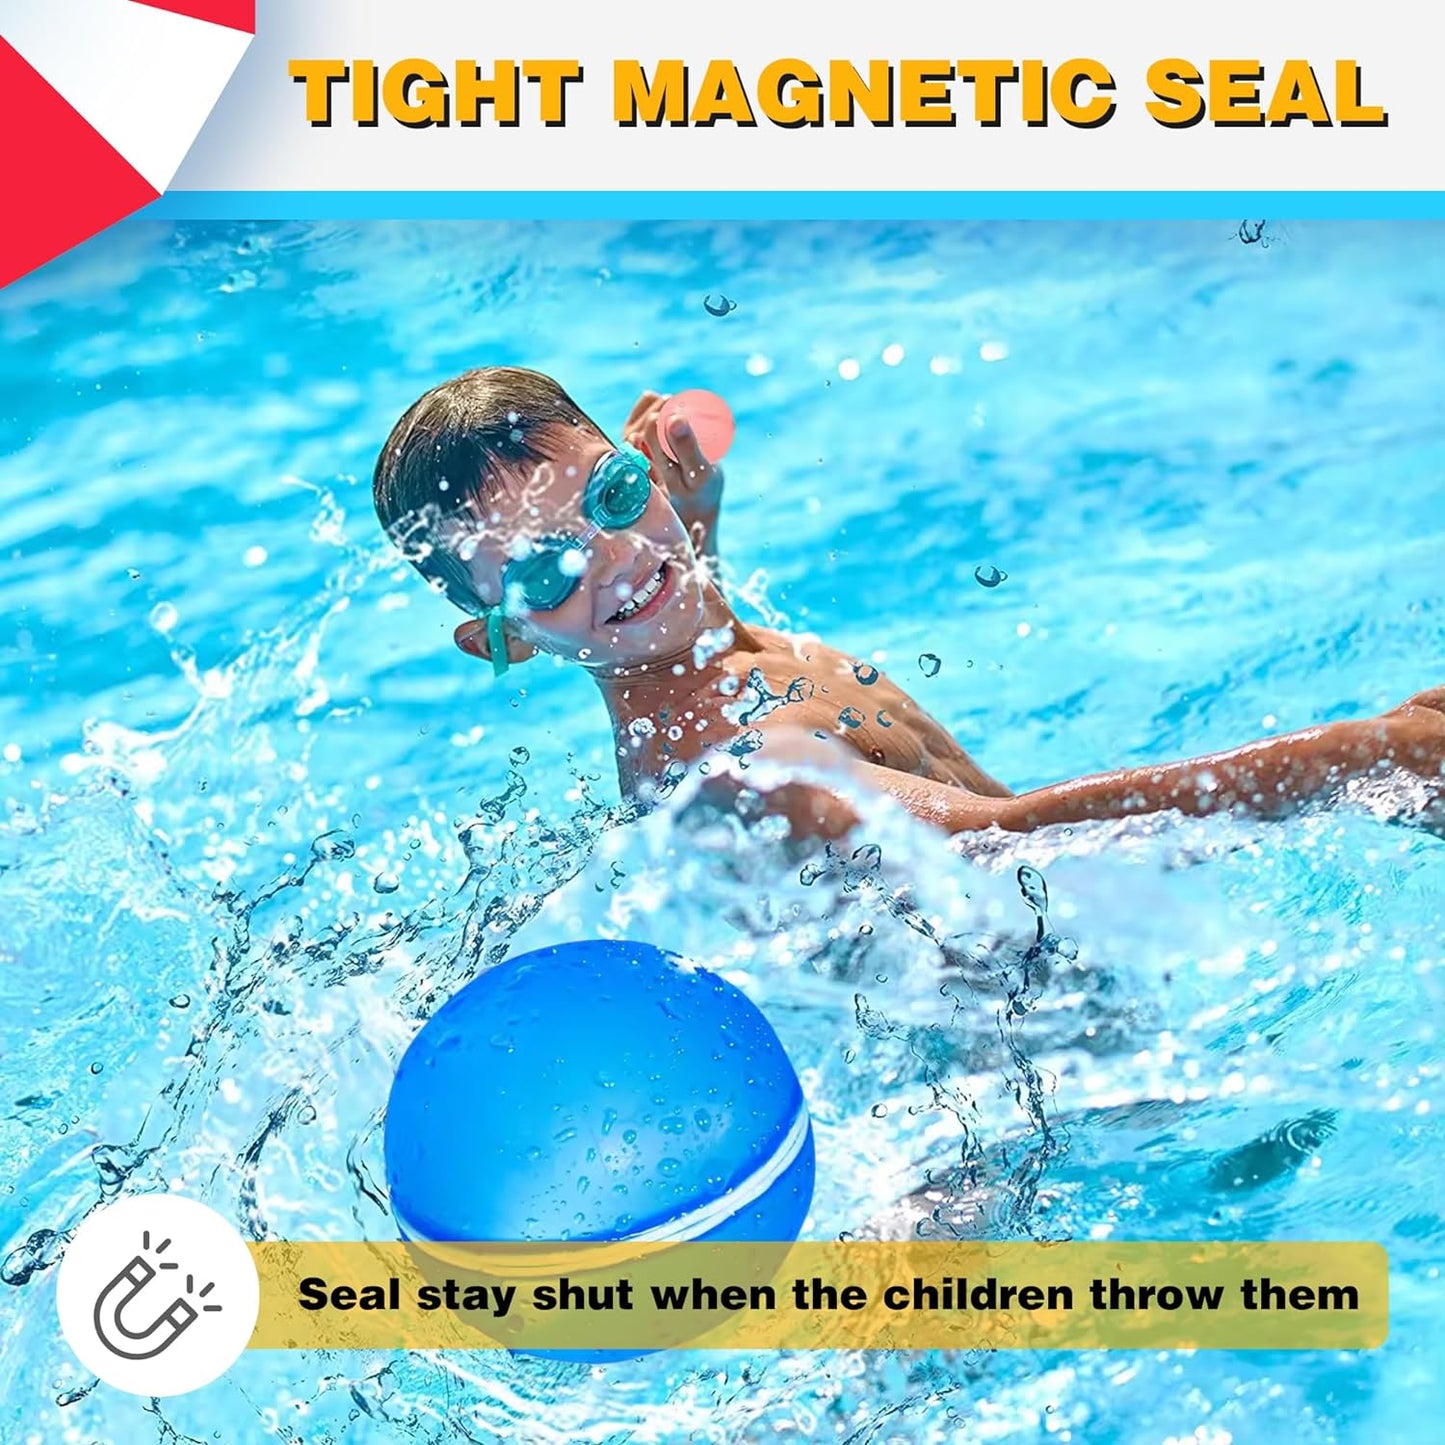 16 Pcs Reusable Water Balloons for Kids, Quick Fill Toddler Summer Toys, Bulk Refillable Magnetic Swimming Pool Outdoor Self-Sealing Bombs